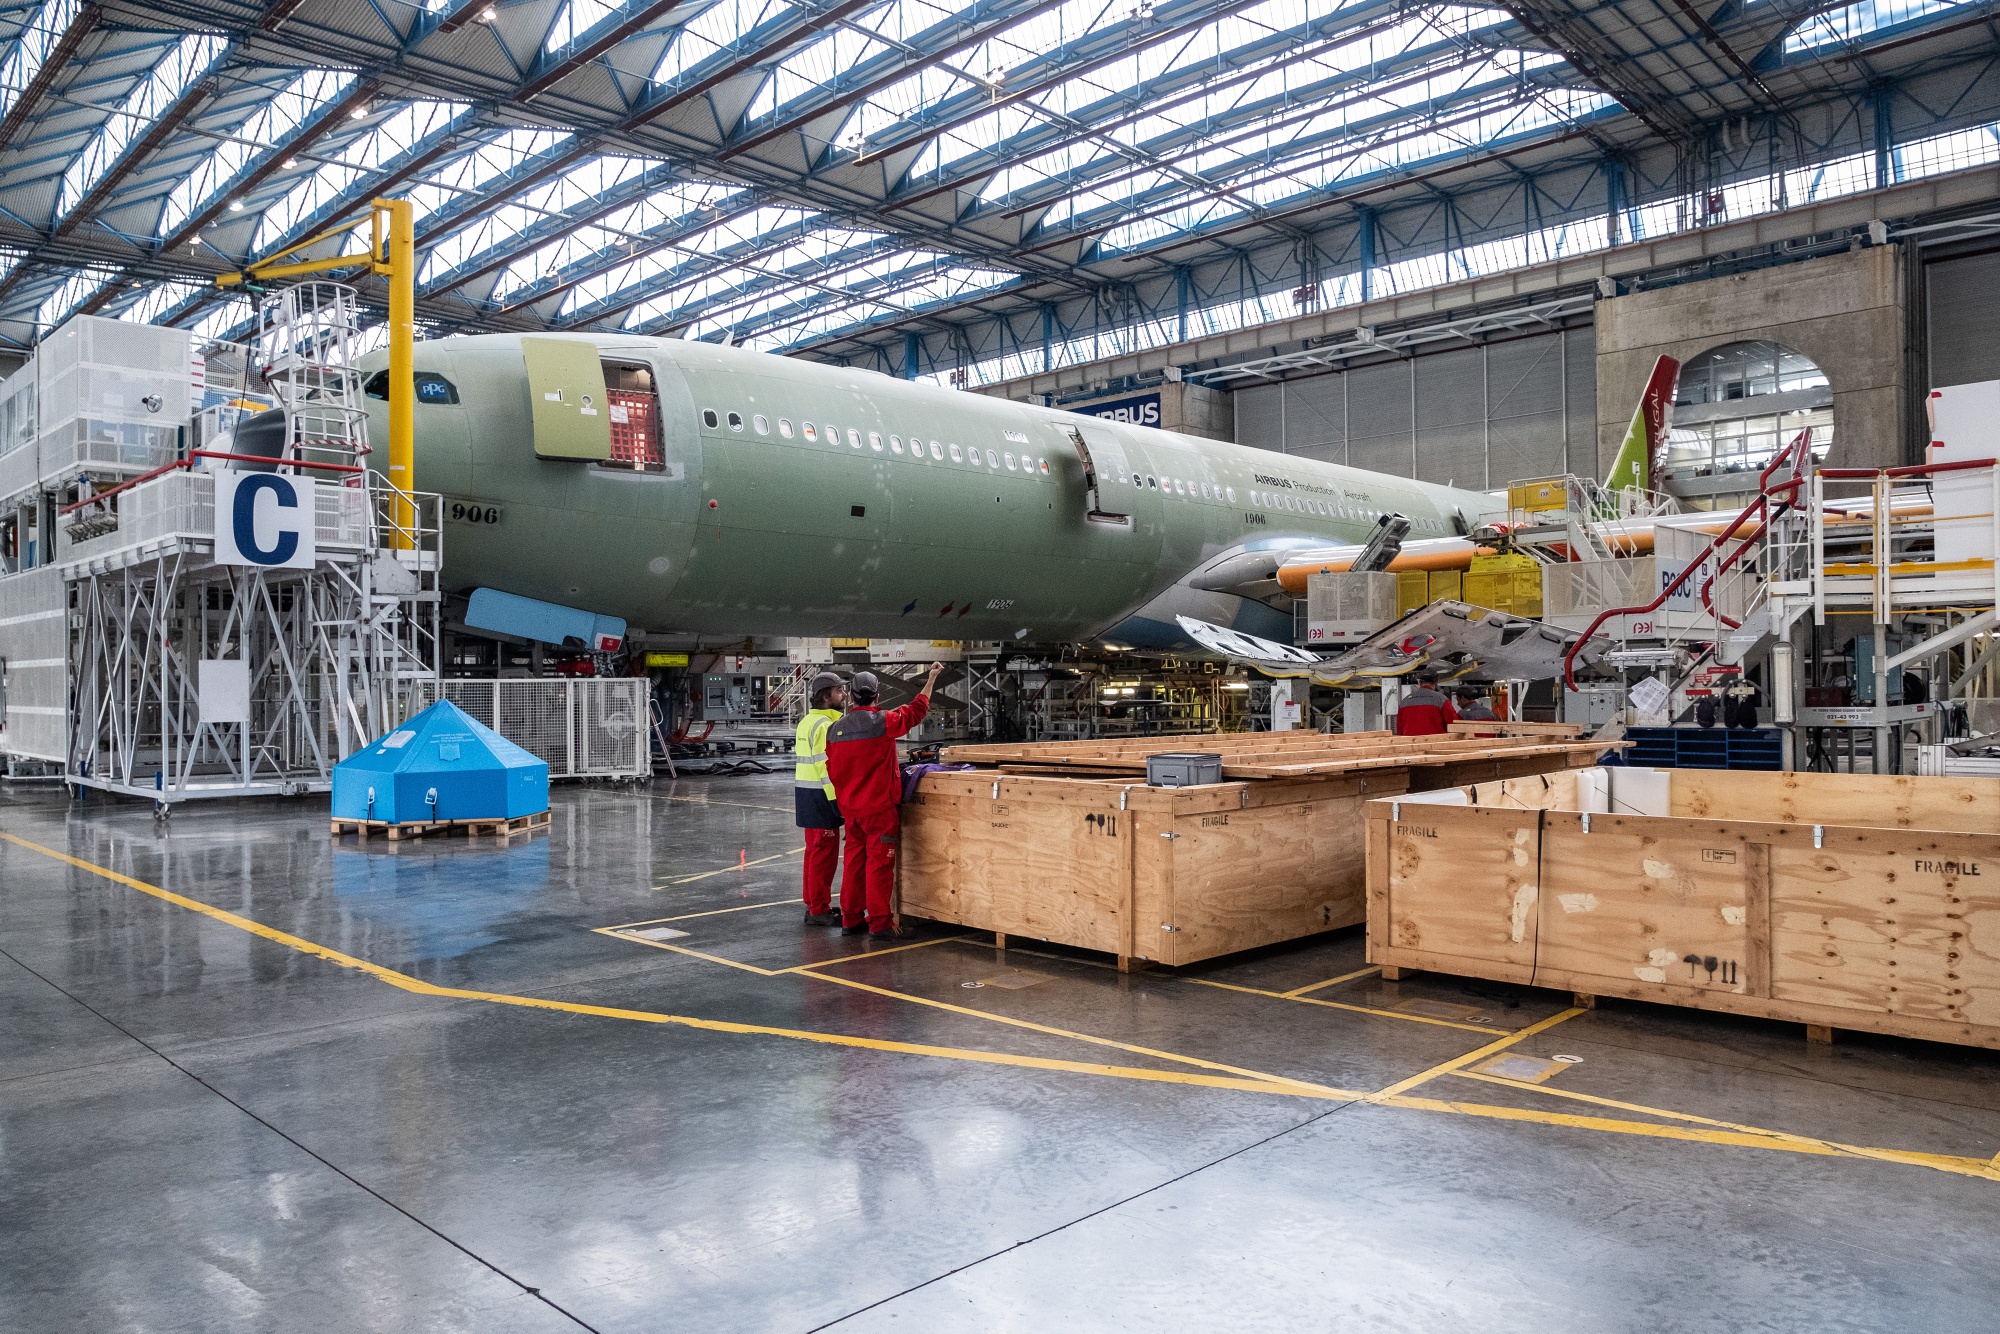 The Airbus SE assembly plant in Toulouse, France.